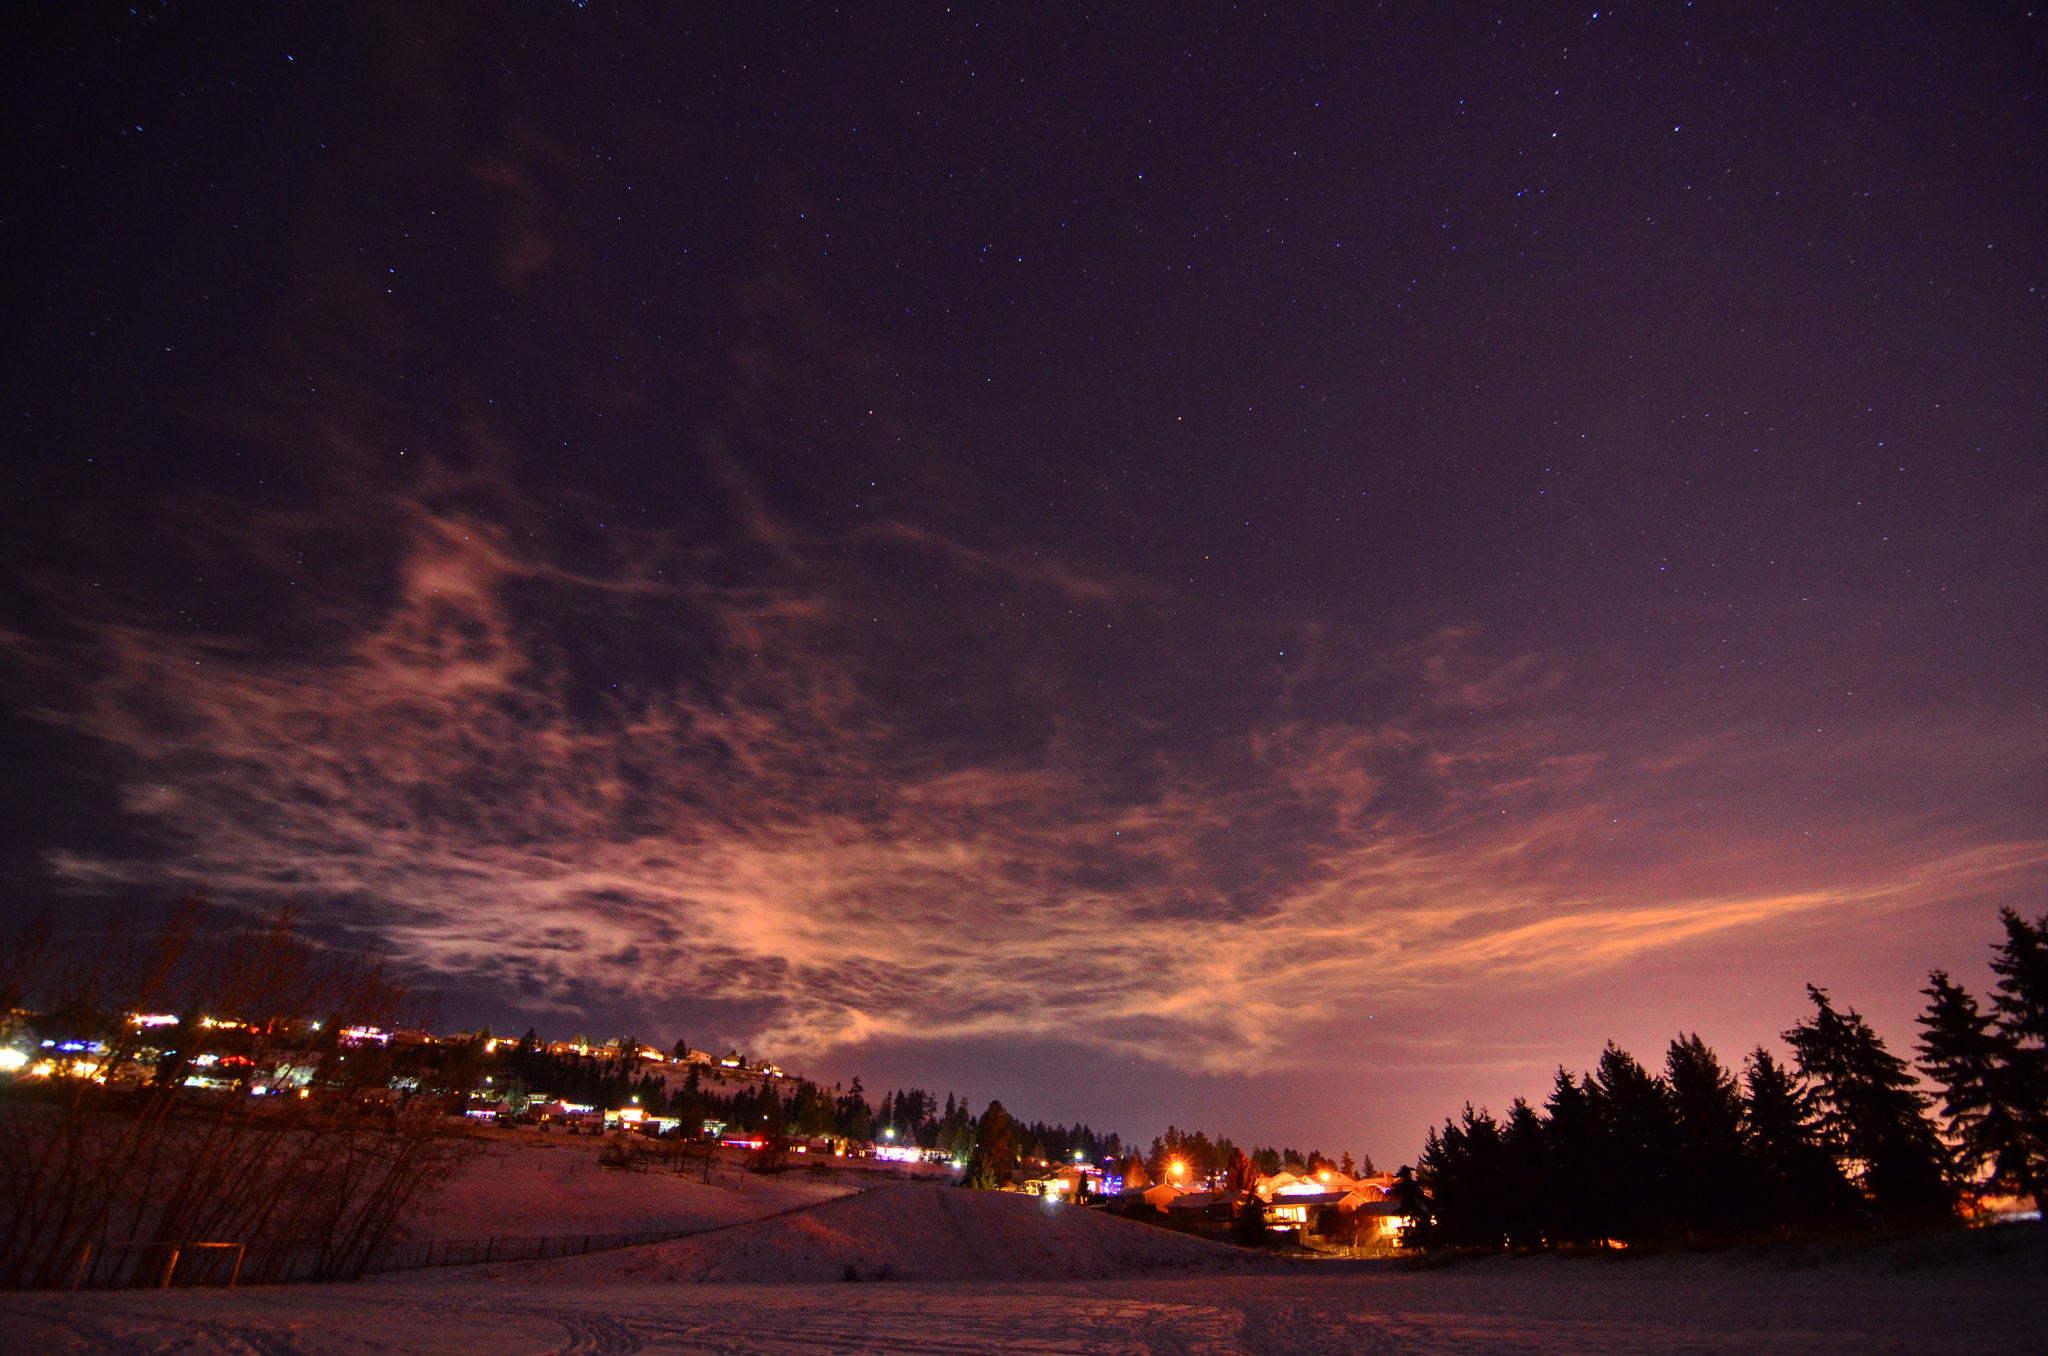 Nikon D7000 sample photo. Interesting cloud formation to catch the light pollution. kamloops, bc canada photography